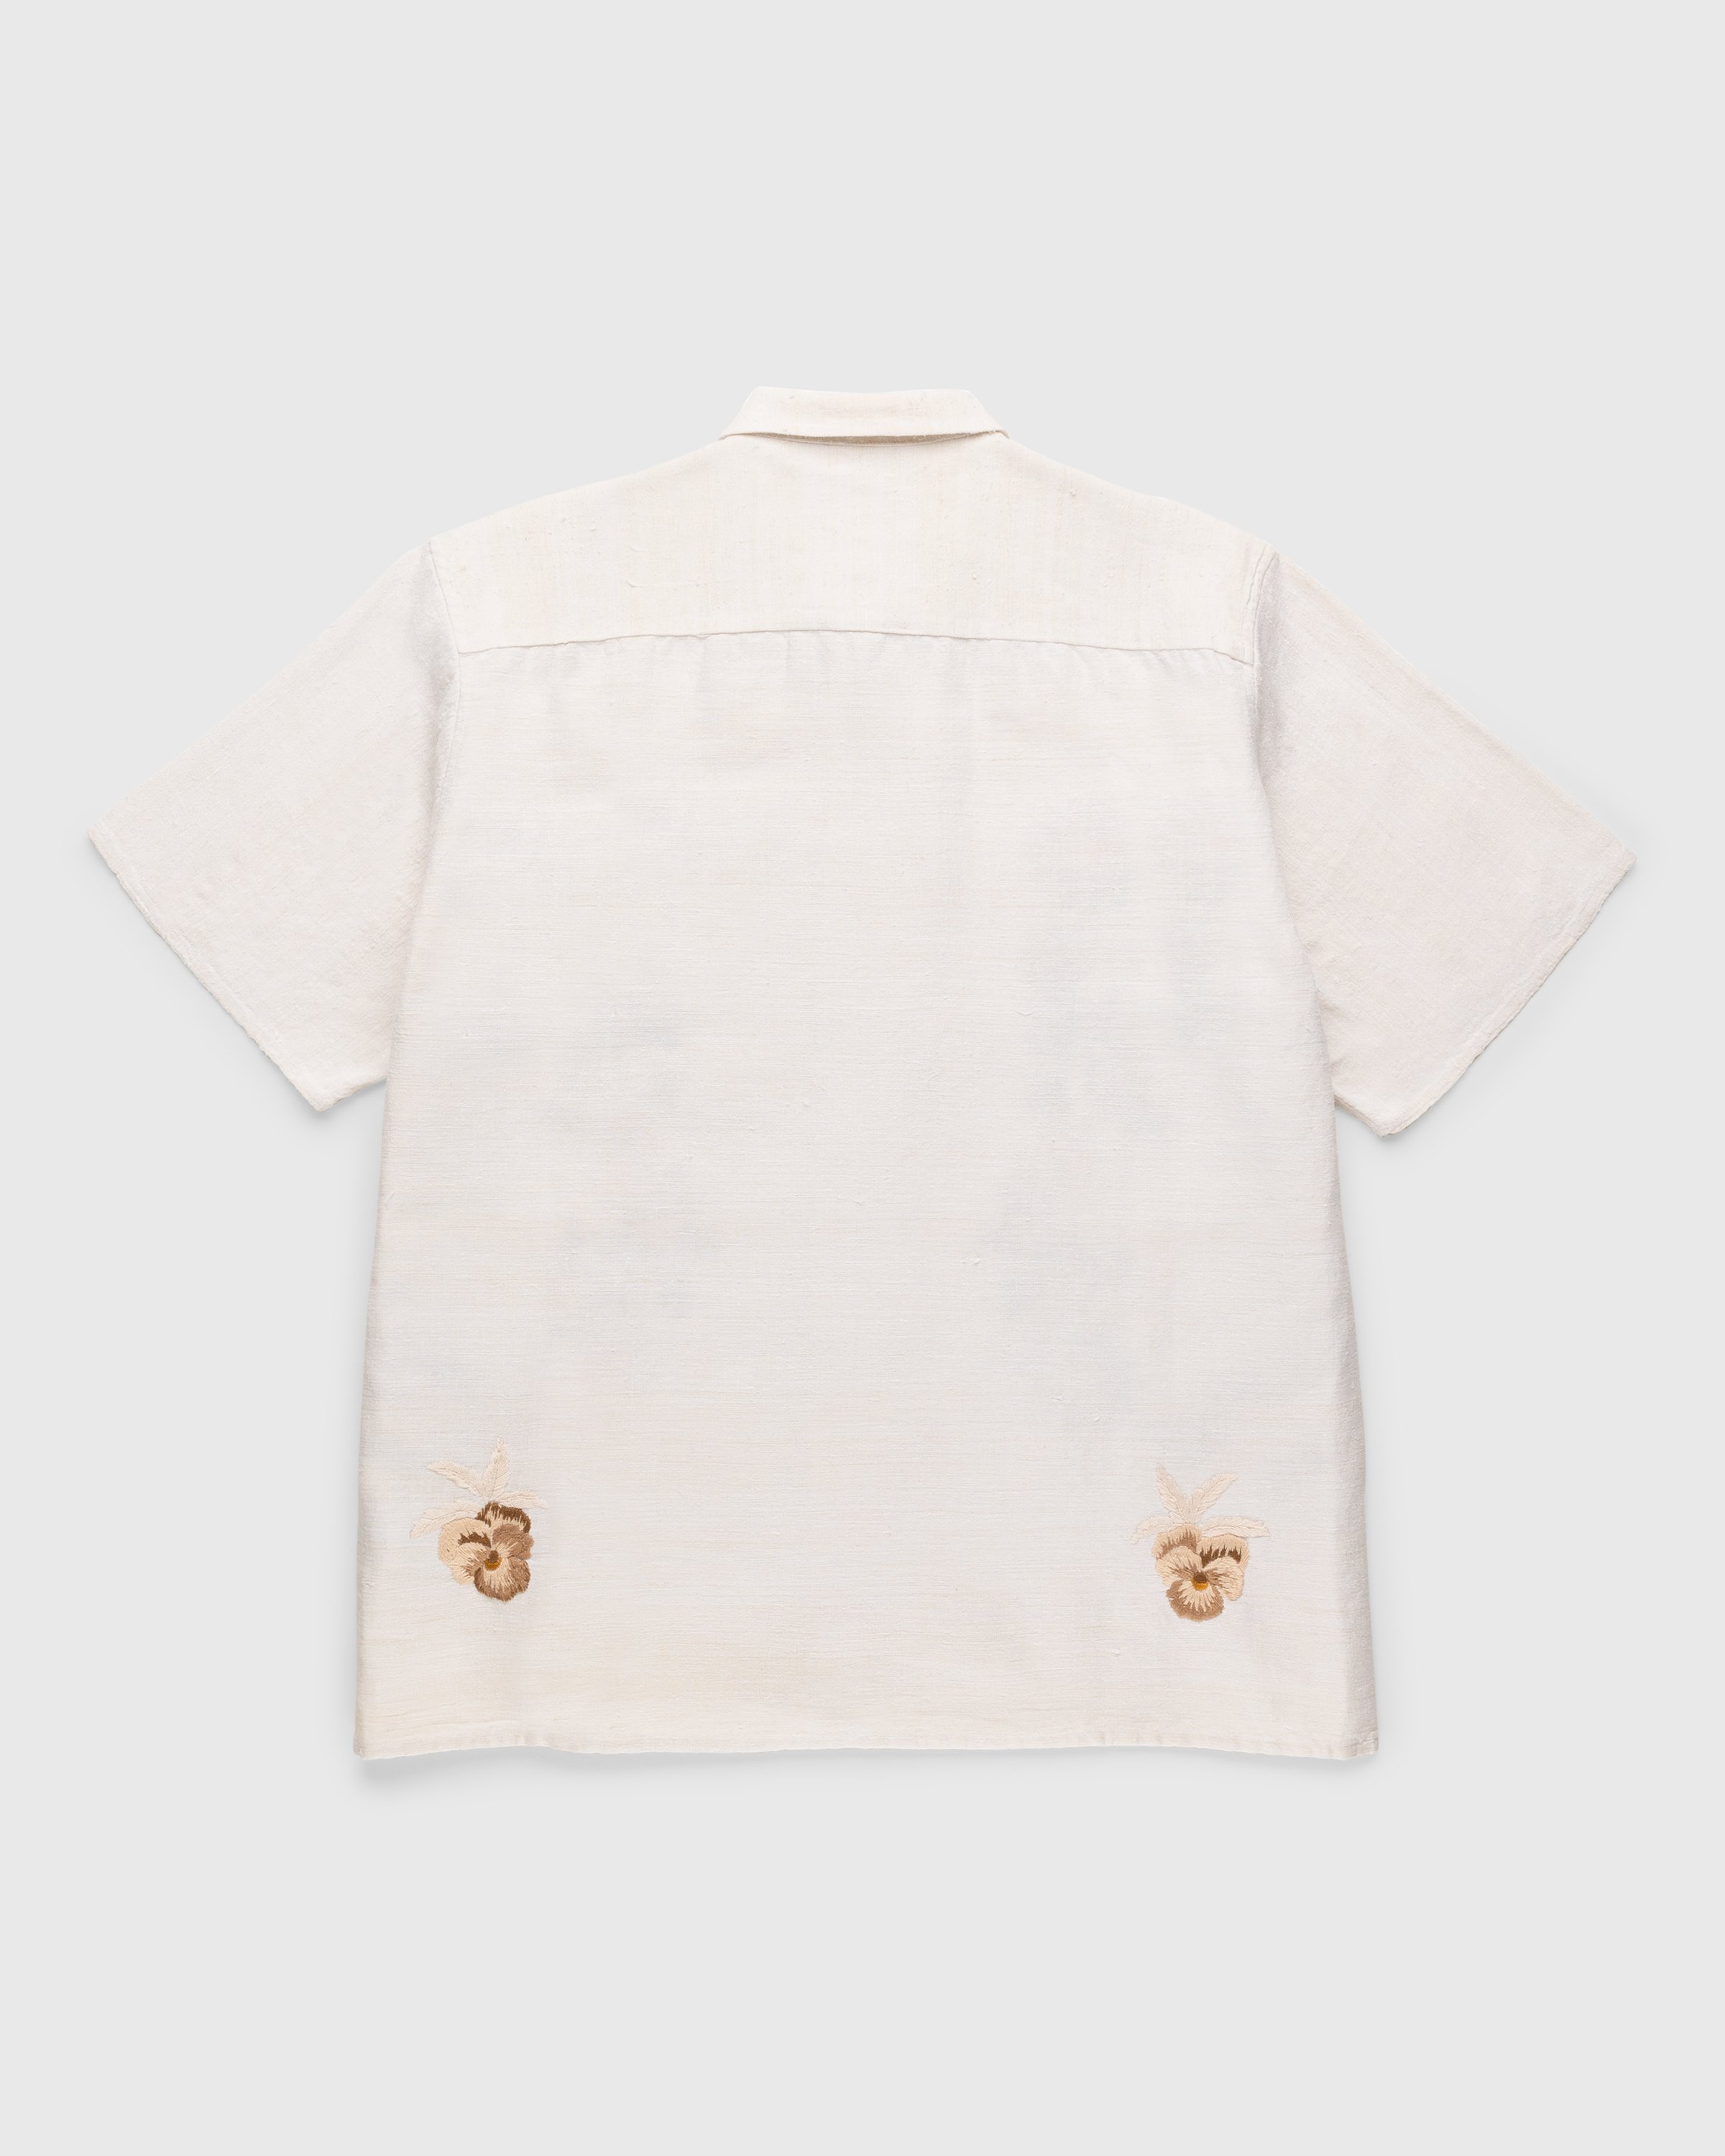 Diomene by Damir Doma - Embroidered Vacation Shirt Cream - Clothing - White - Image 2